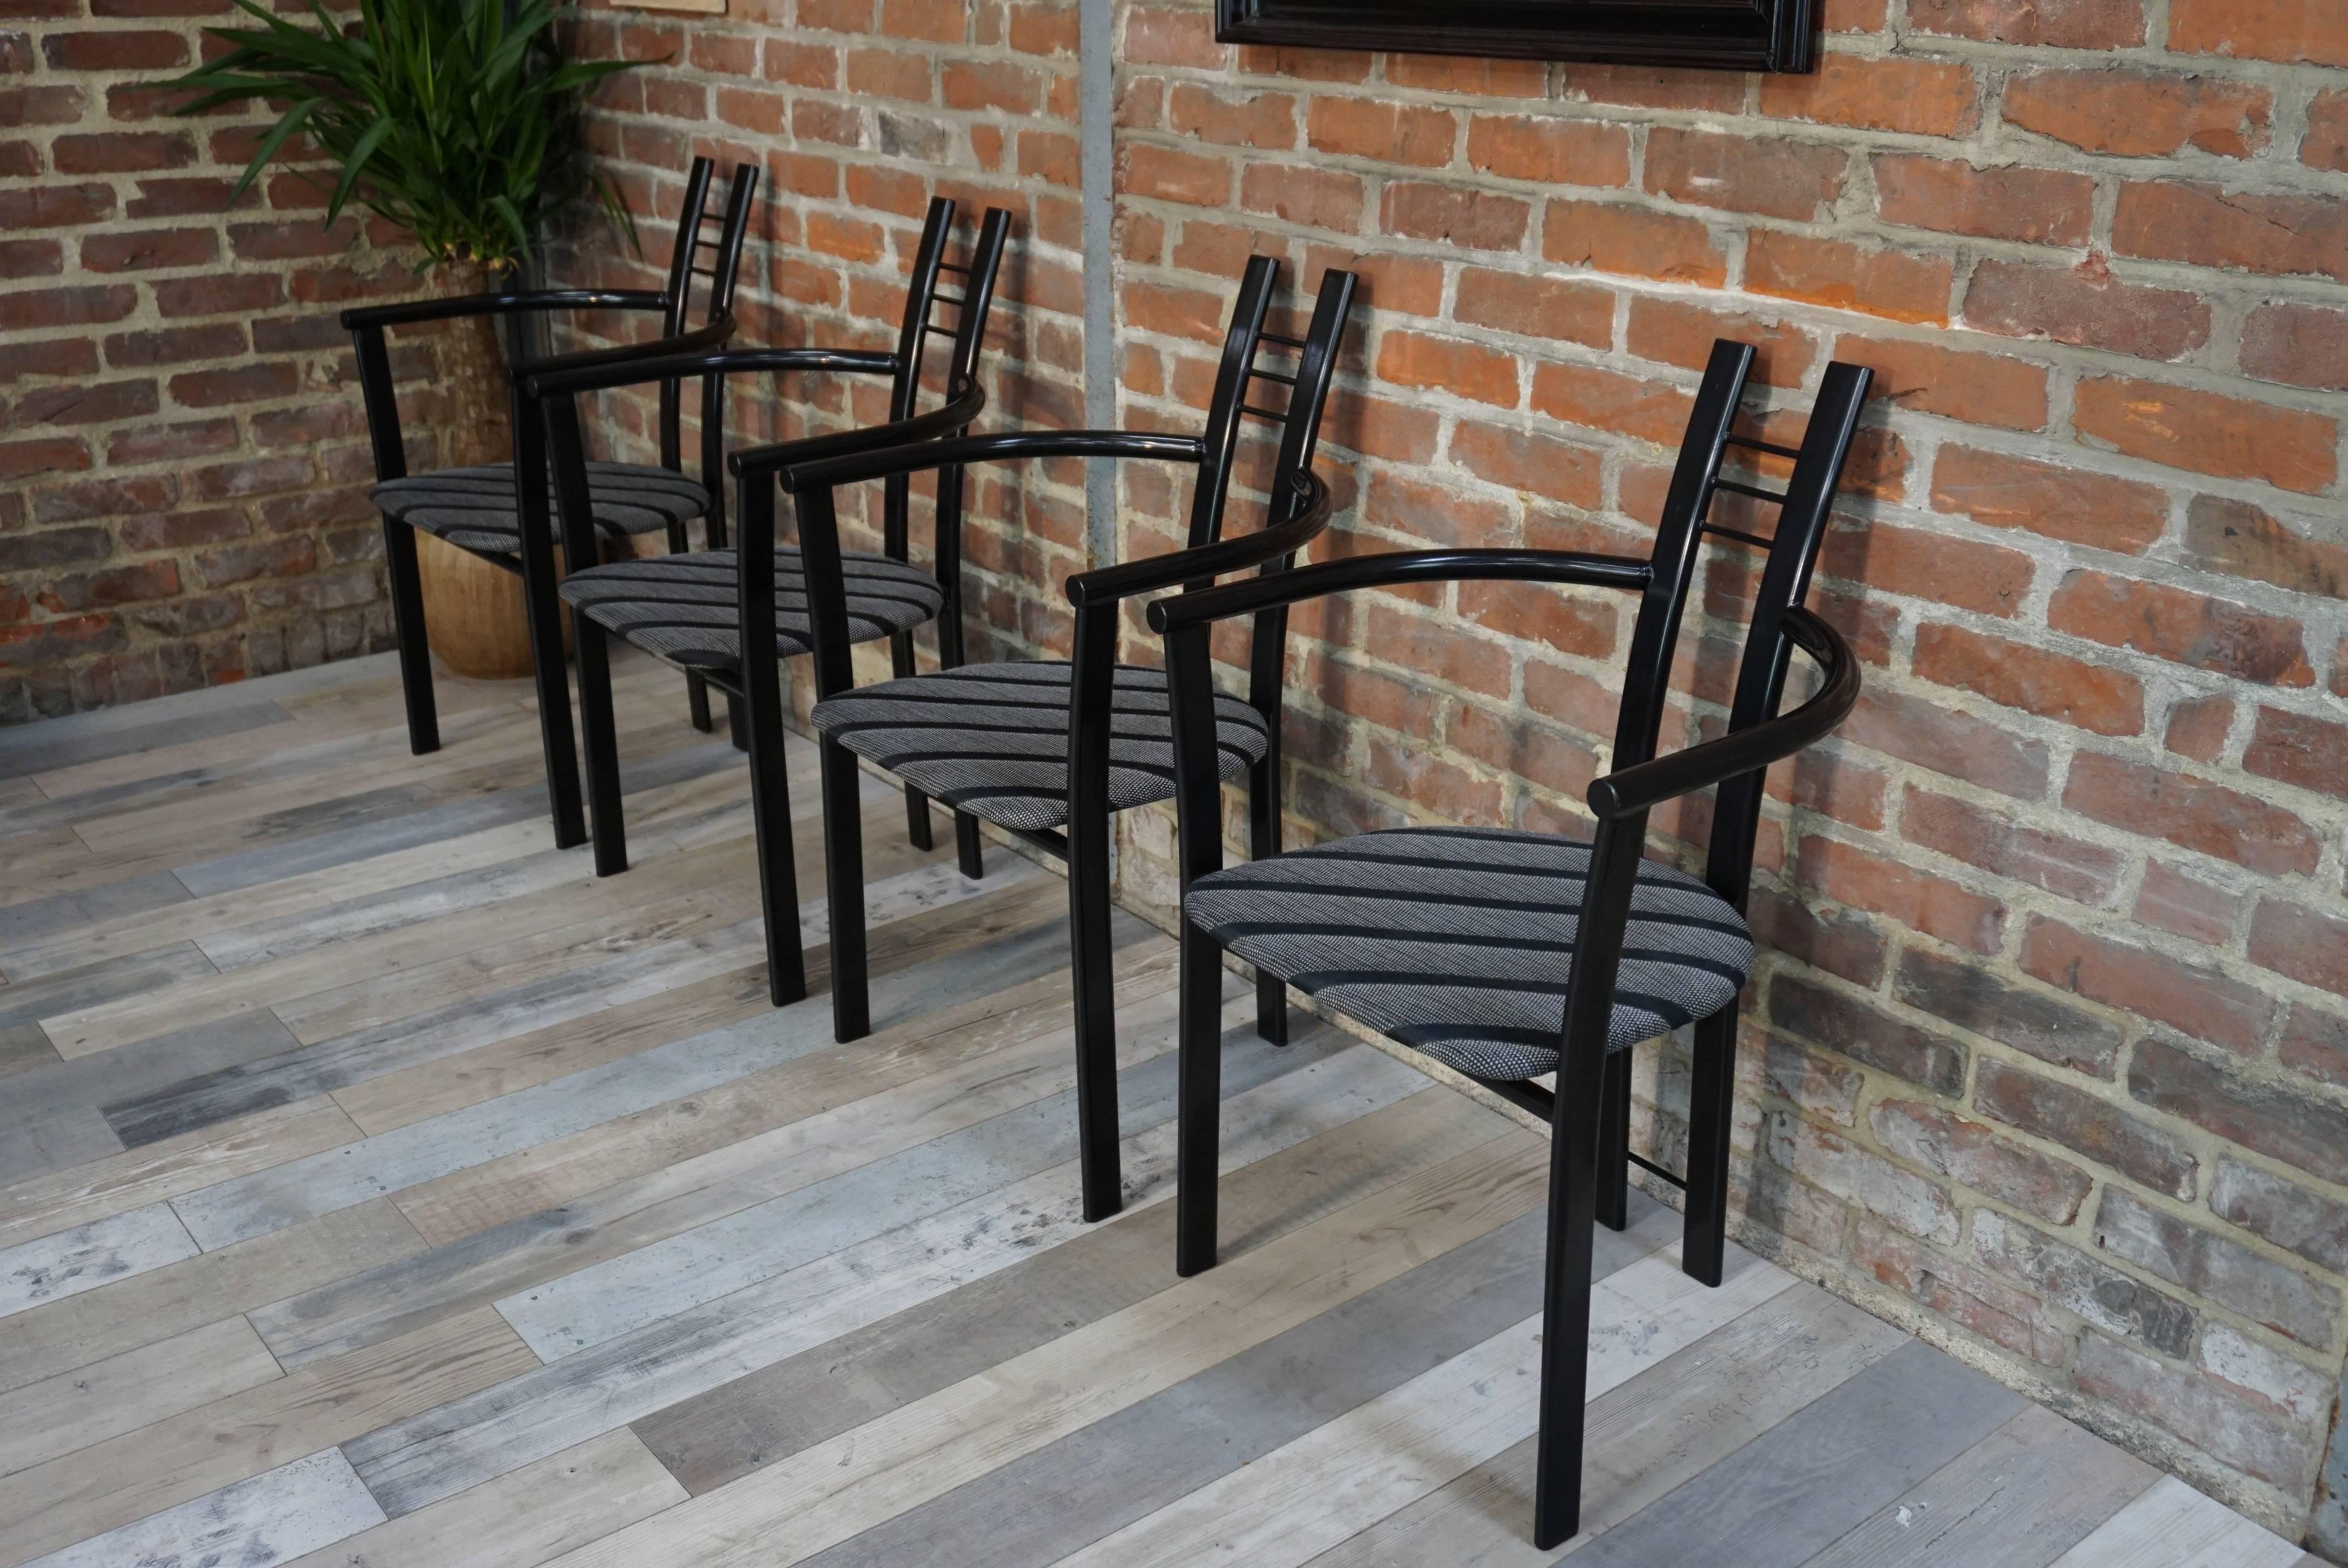 Tendency and very beautiful, these four chairs, robust and Italian design of the 1980s, have an aerial structure in black lacquered metal.
Comfortable, the black tubular metal armrests have a height of 69 cm and a diameter of 3 cm.
The back in